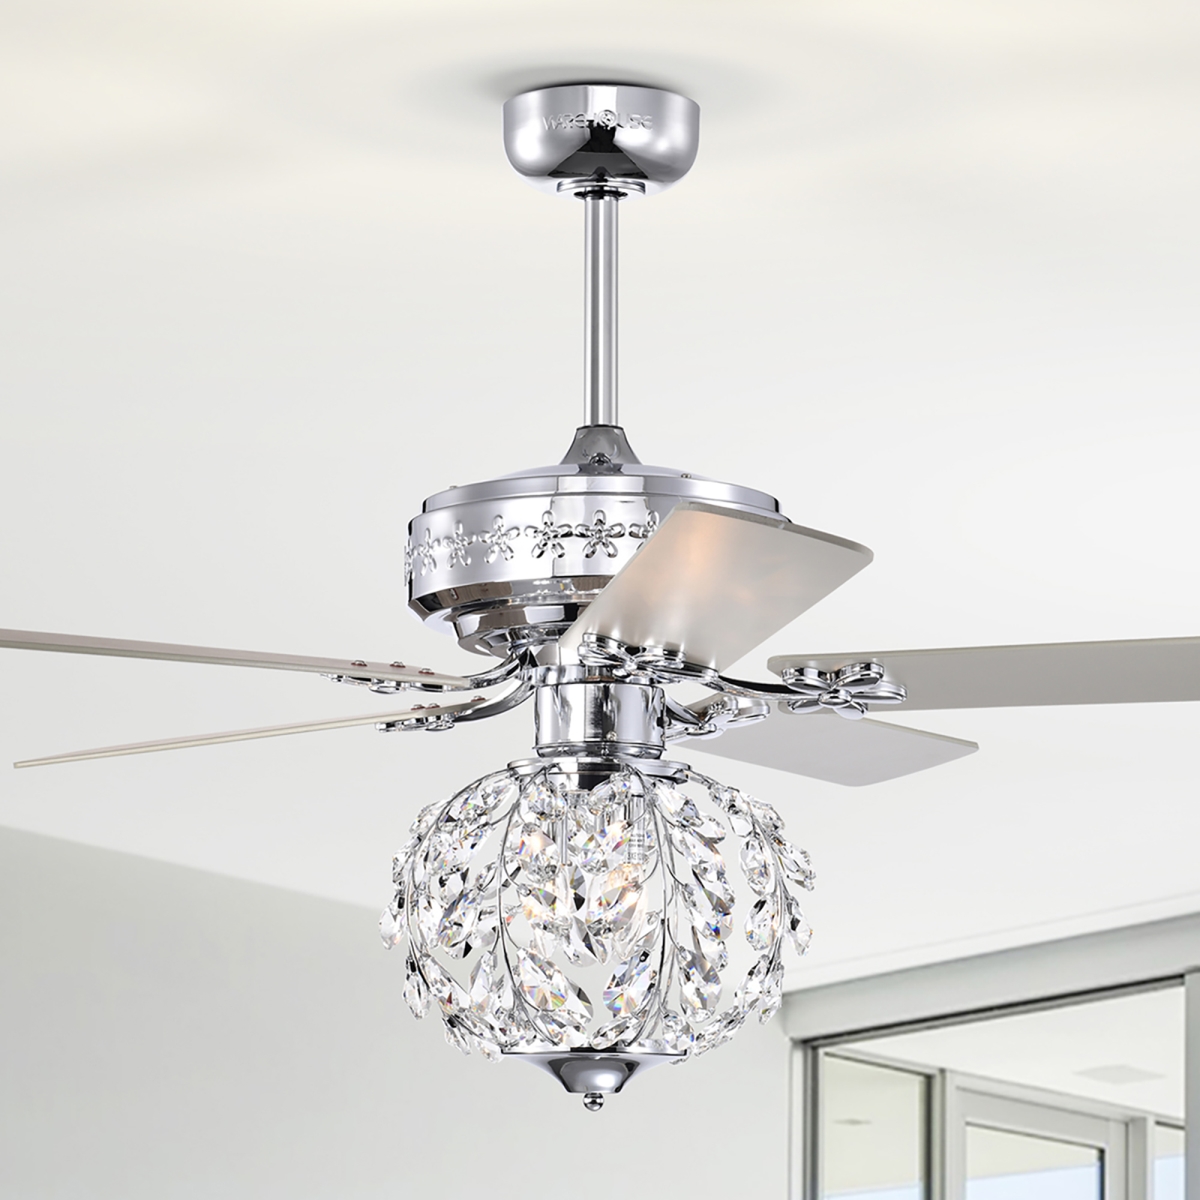 Wellas 52 in. 3-Light Indoor Polished Chrome Finish Ceiling Fan with Light Kit